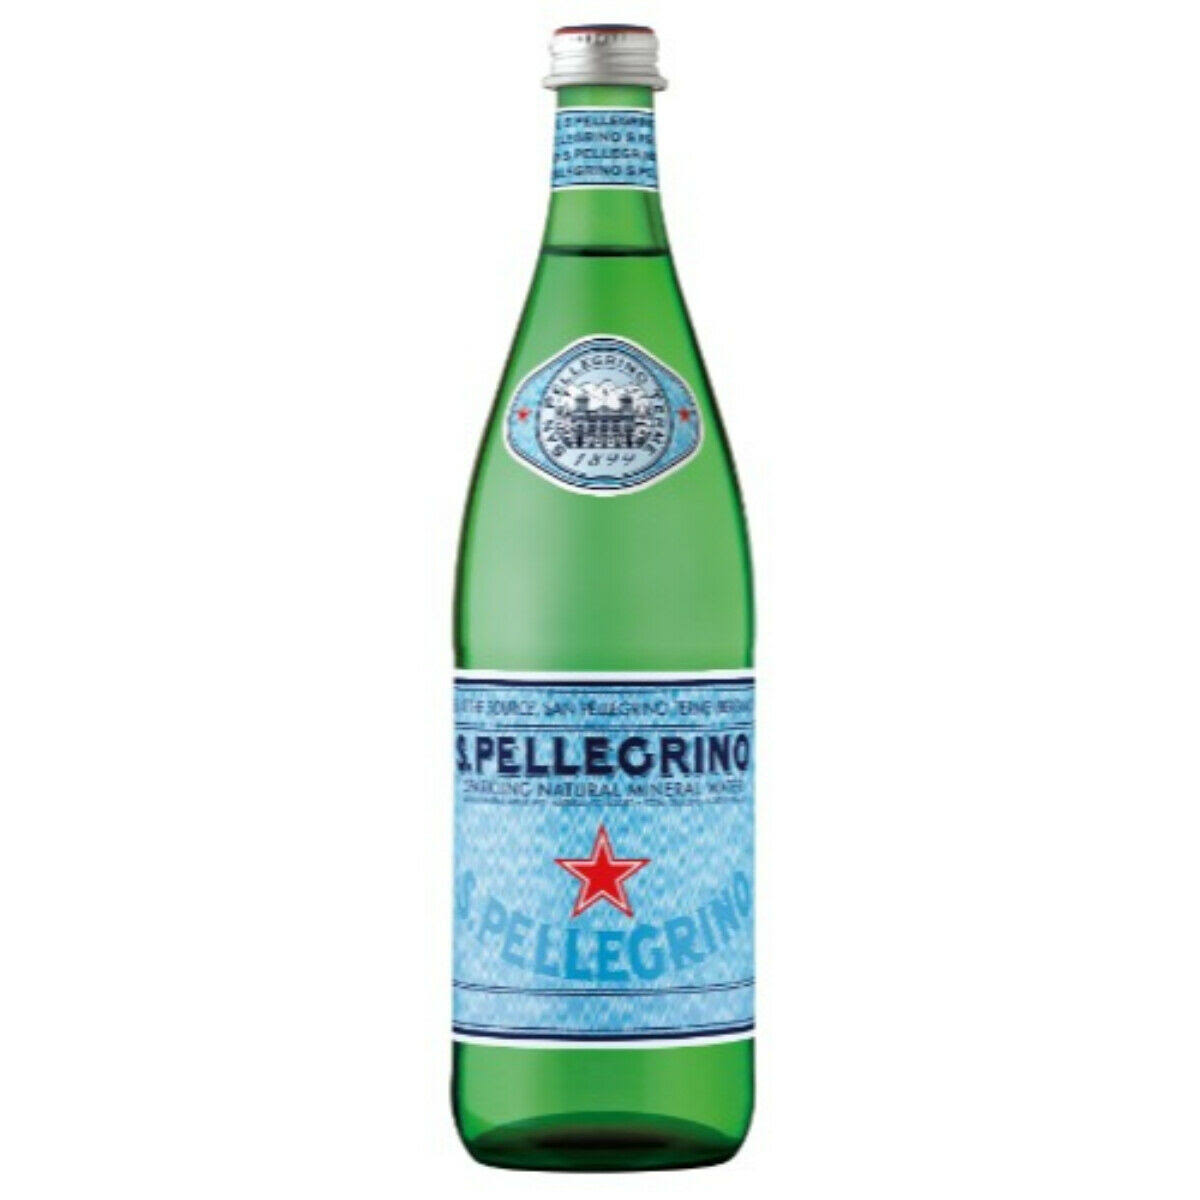 SANPELLEGRINO - Natural mineral water - 750 ml - pack of 12